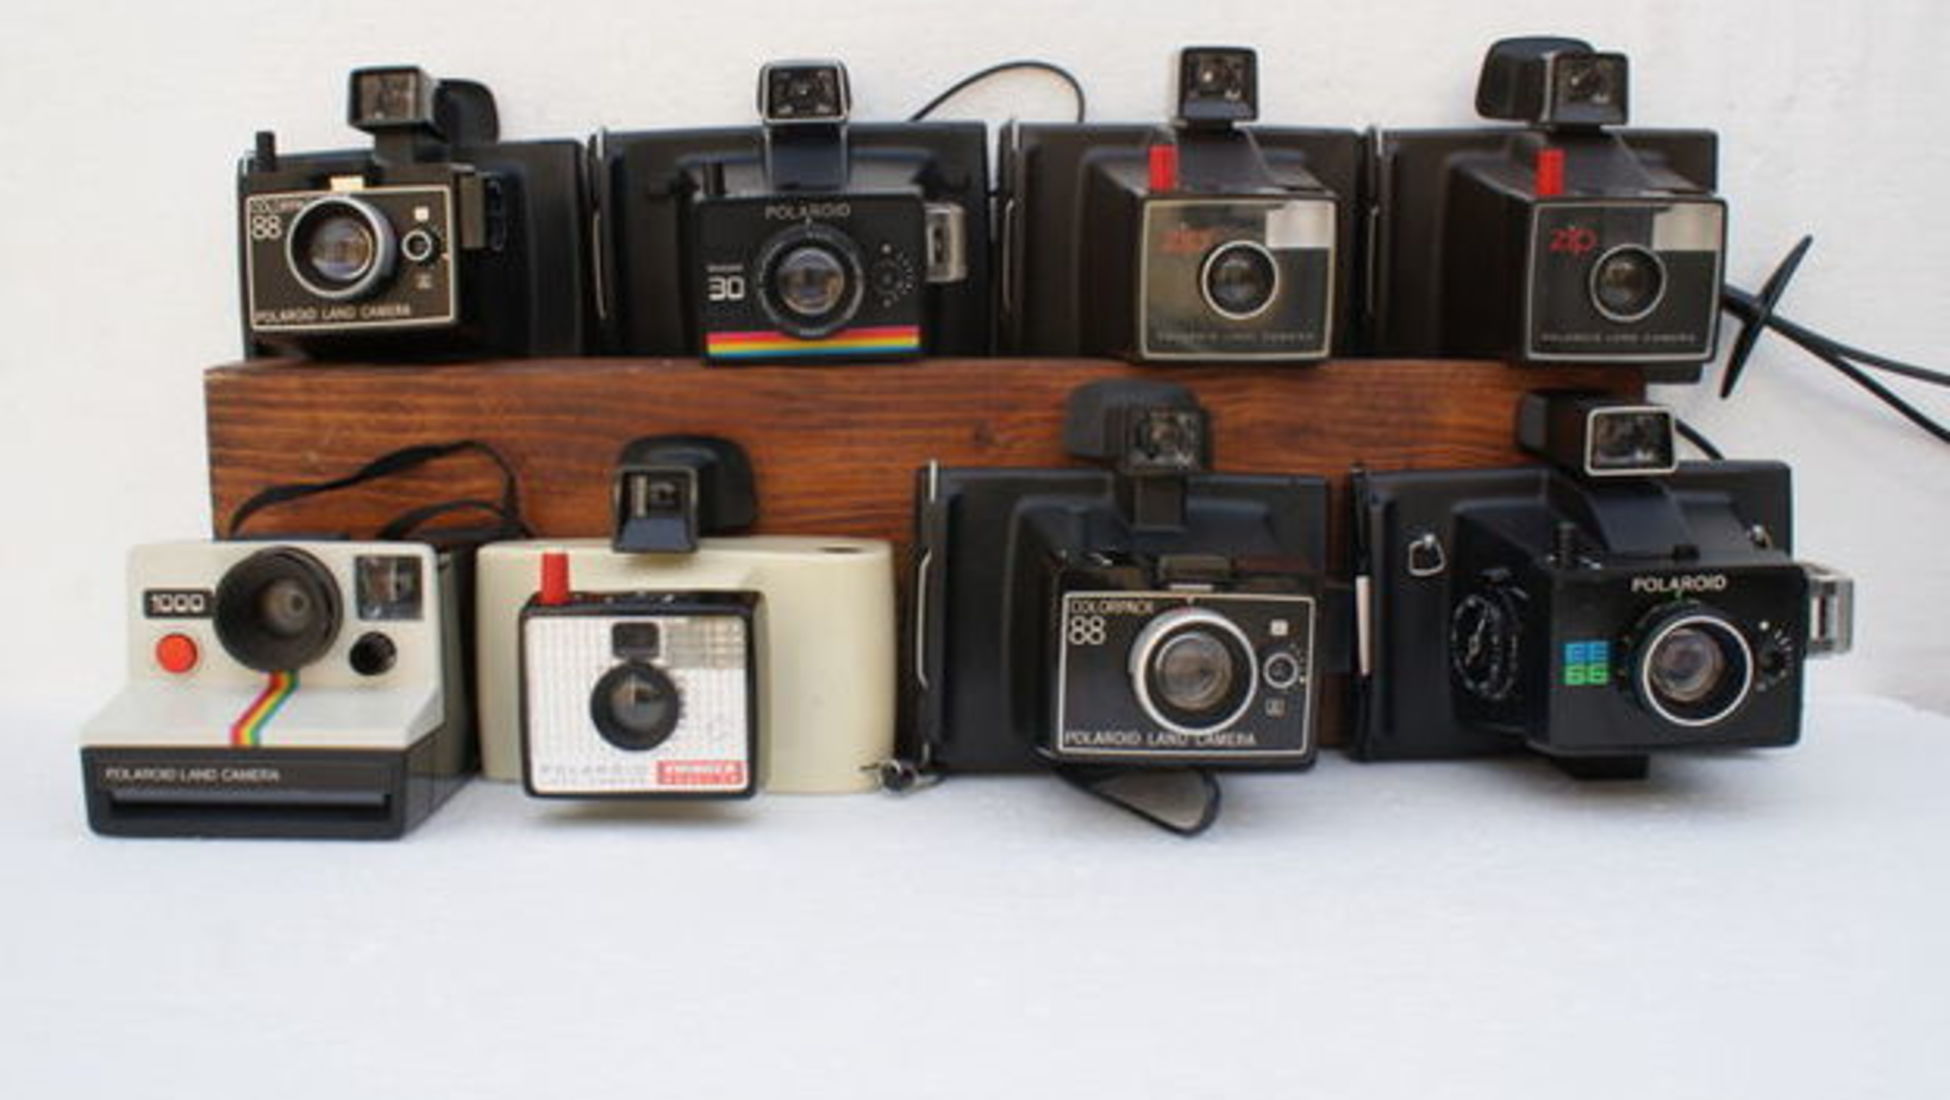 How Much is Your Old Polaroid Camera Worth? - Catawiki